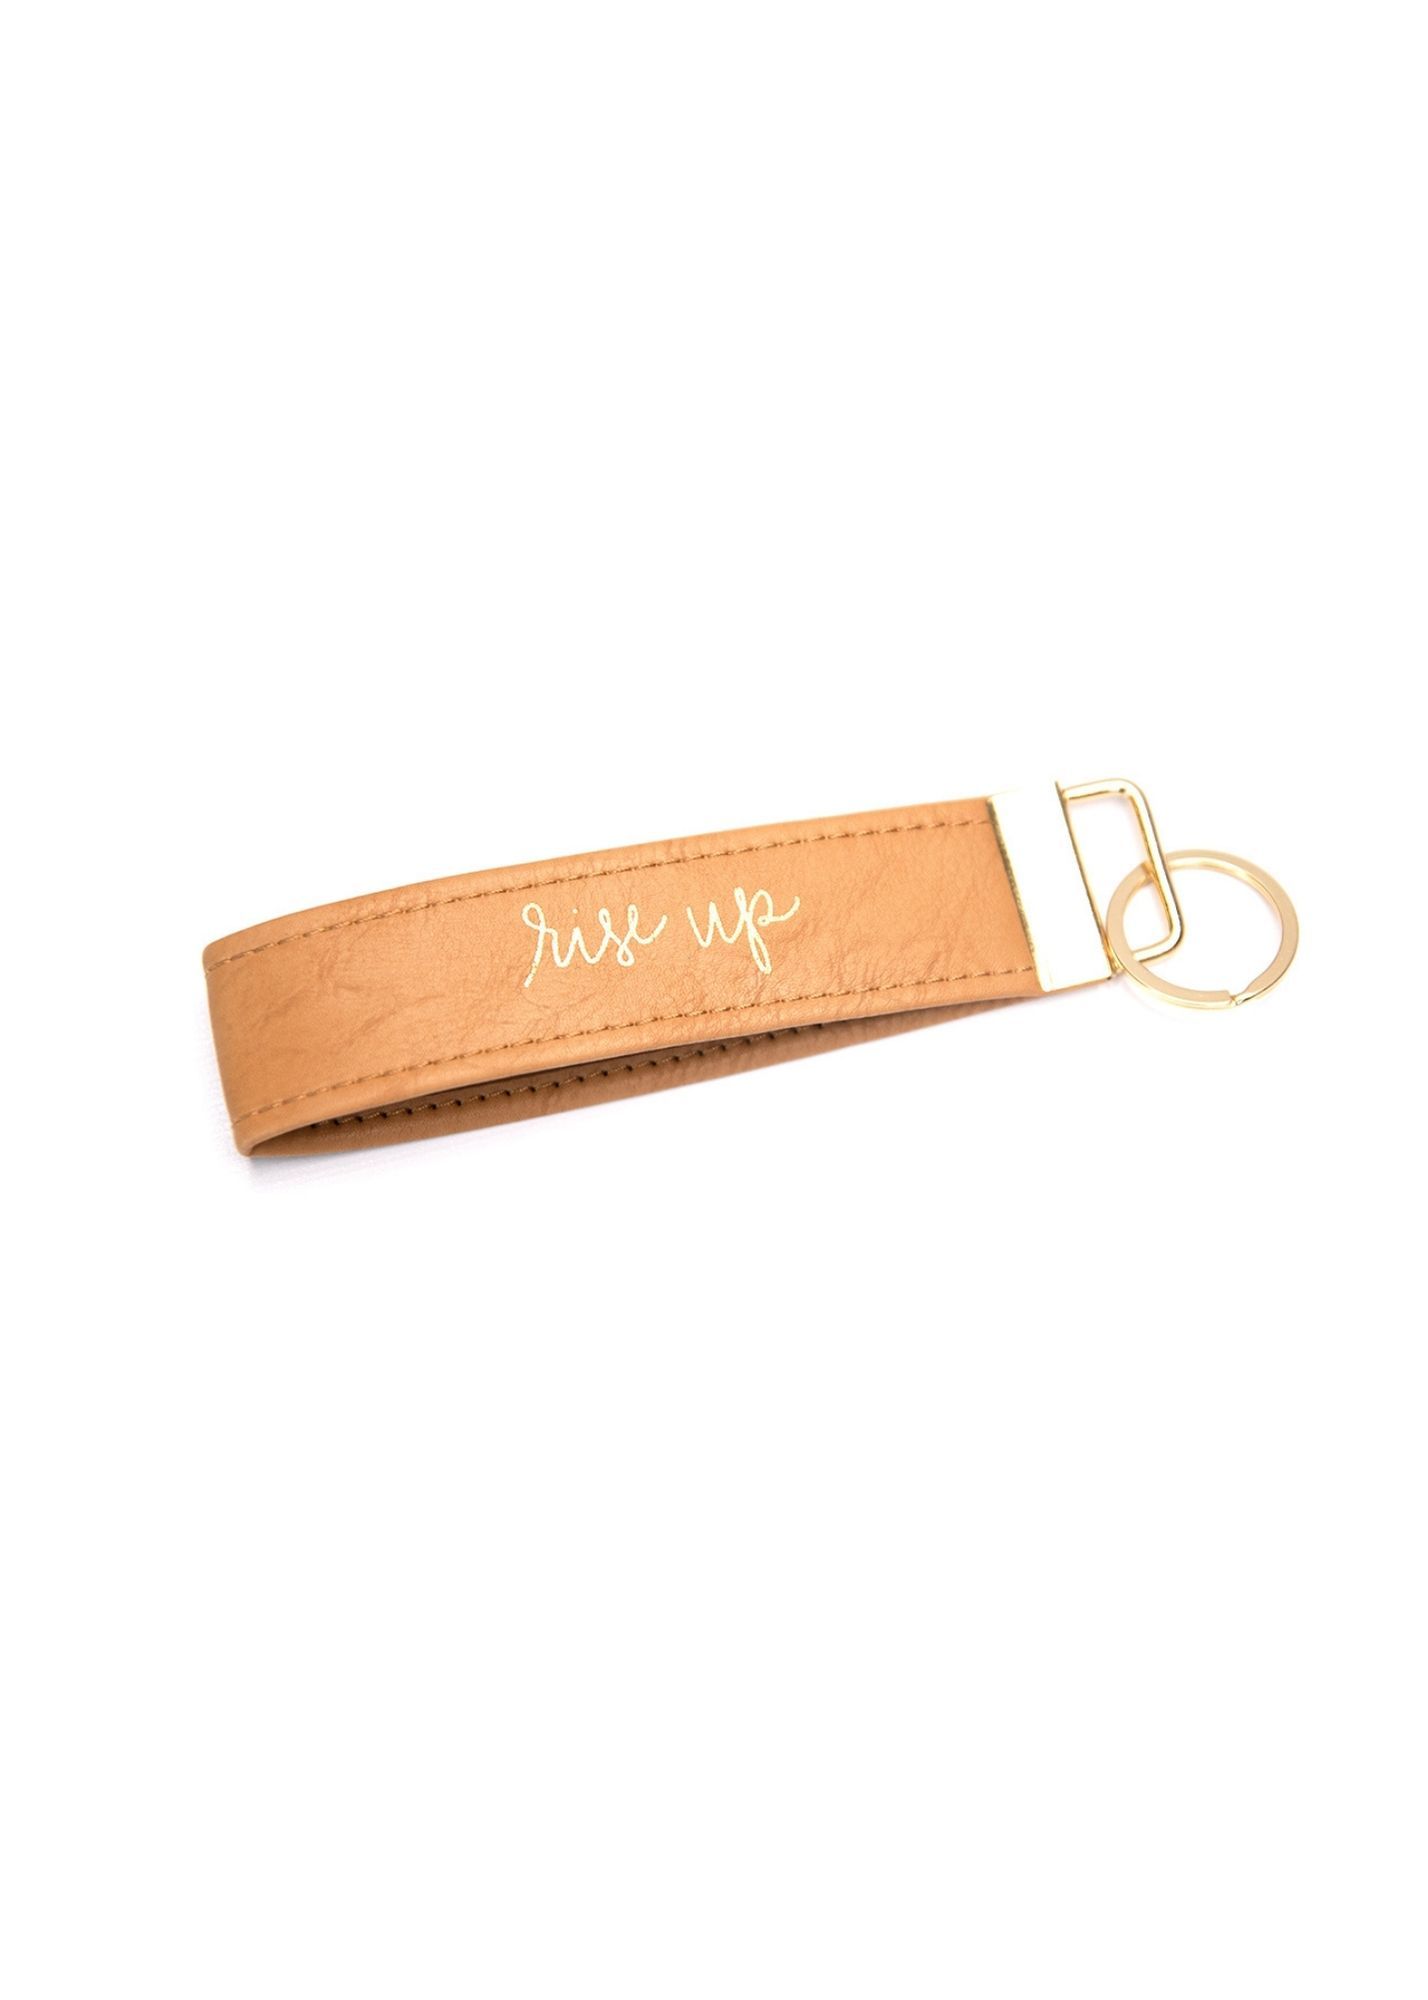 Inspirational Faux Leather Key Fob Accessories Mary Square Rise Up